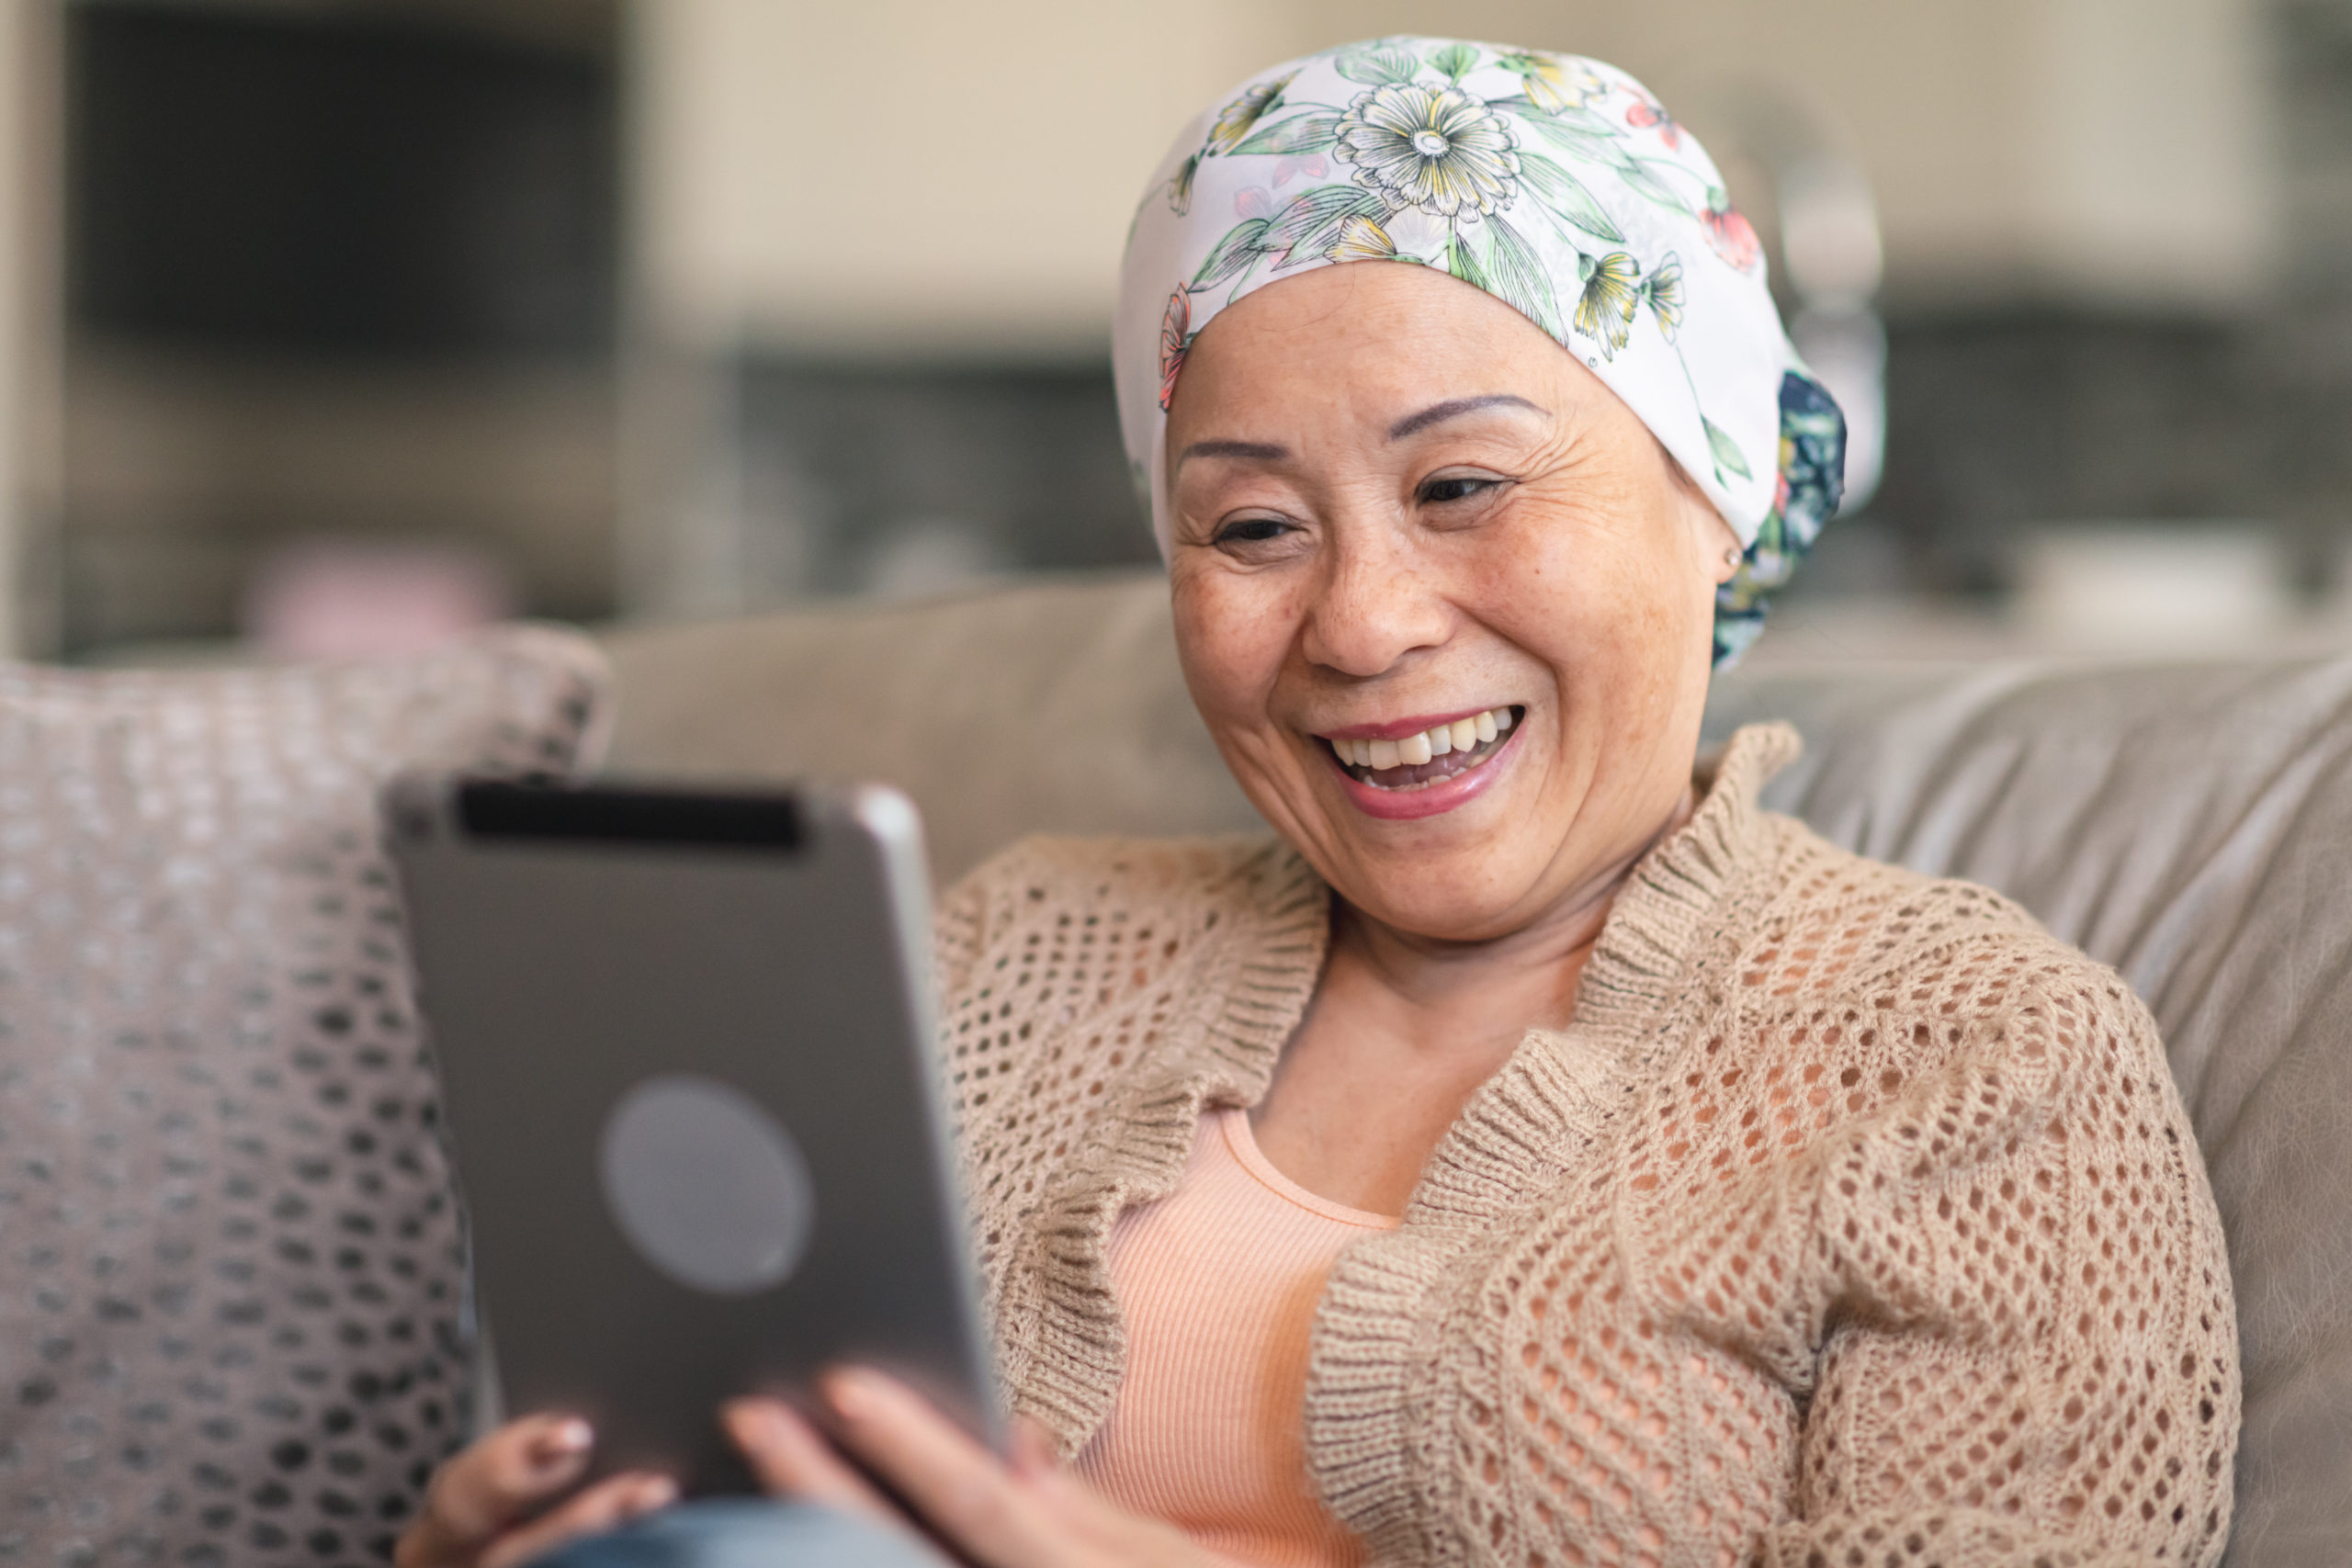 A senior adult woman of Chinese descent has cancer. The happy woman is using a digital tablet to video message friends and family. She is spending time at home. The woman is smiling at the screen. She is wearing a bandana to hide her hair loss from chemotherapy treatment.